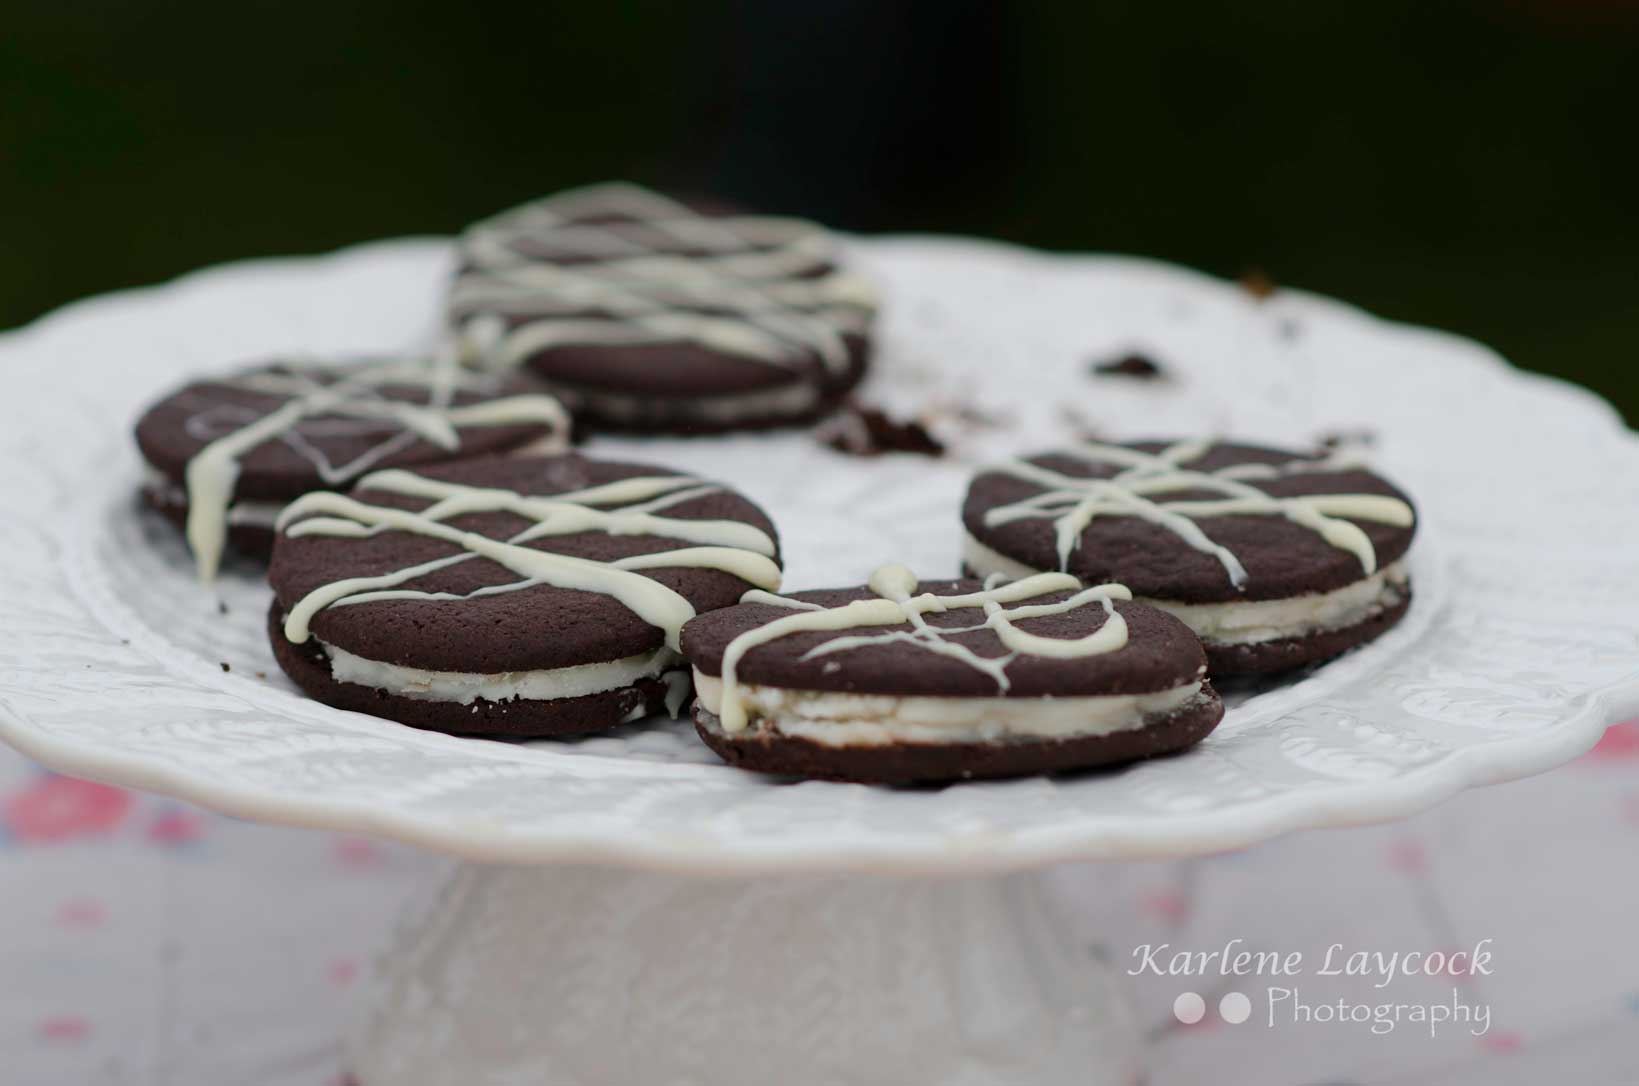 Photograph of Homemade Oreo Cookies taken at a Local Bake Off Event